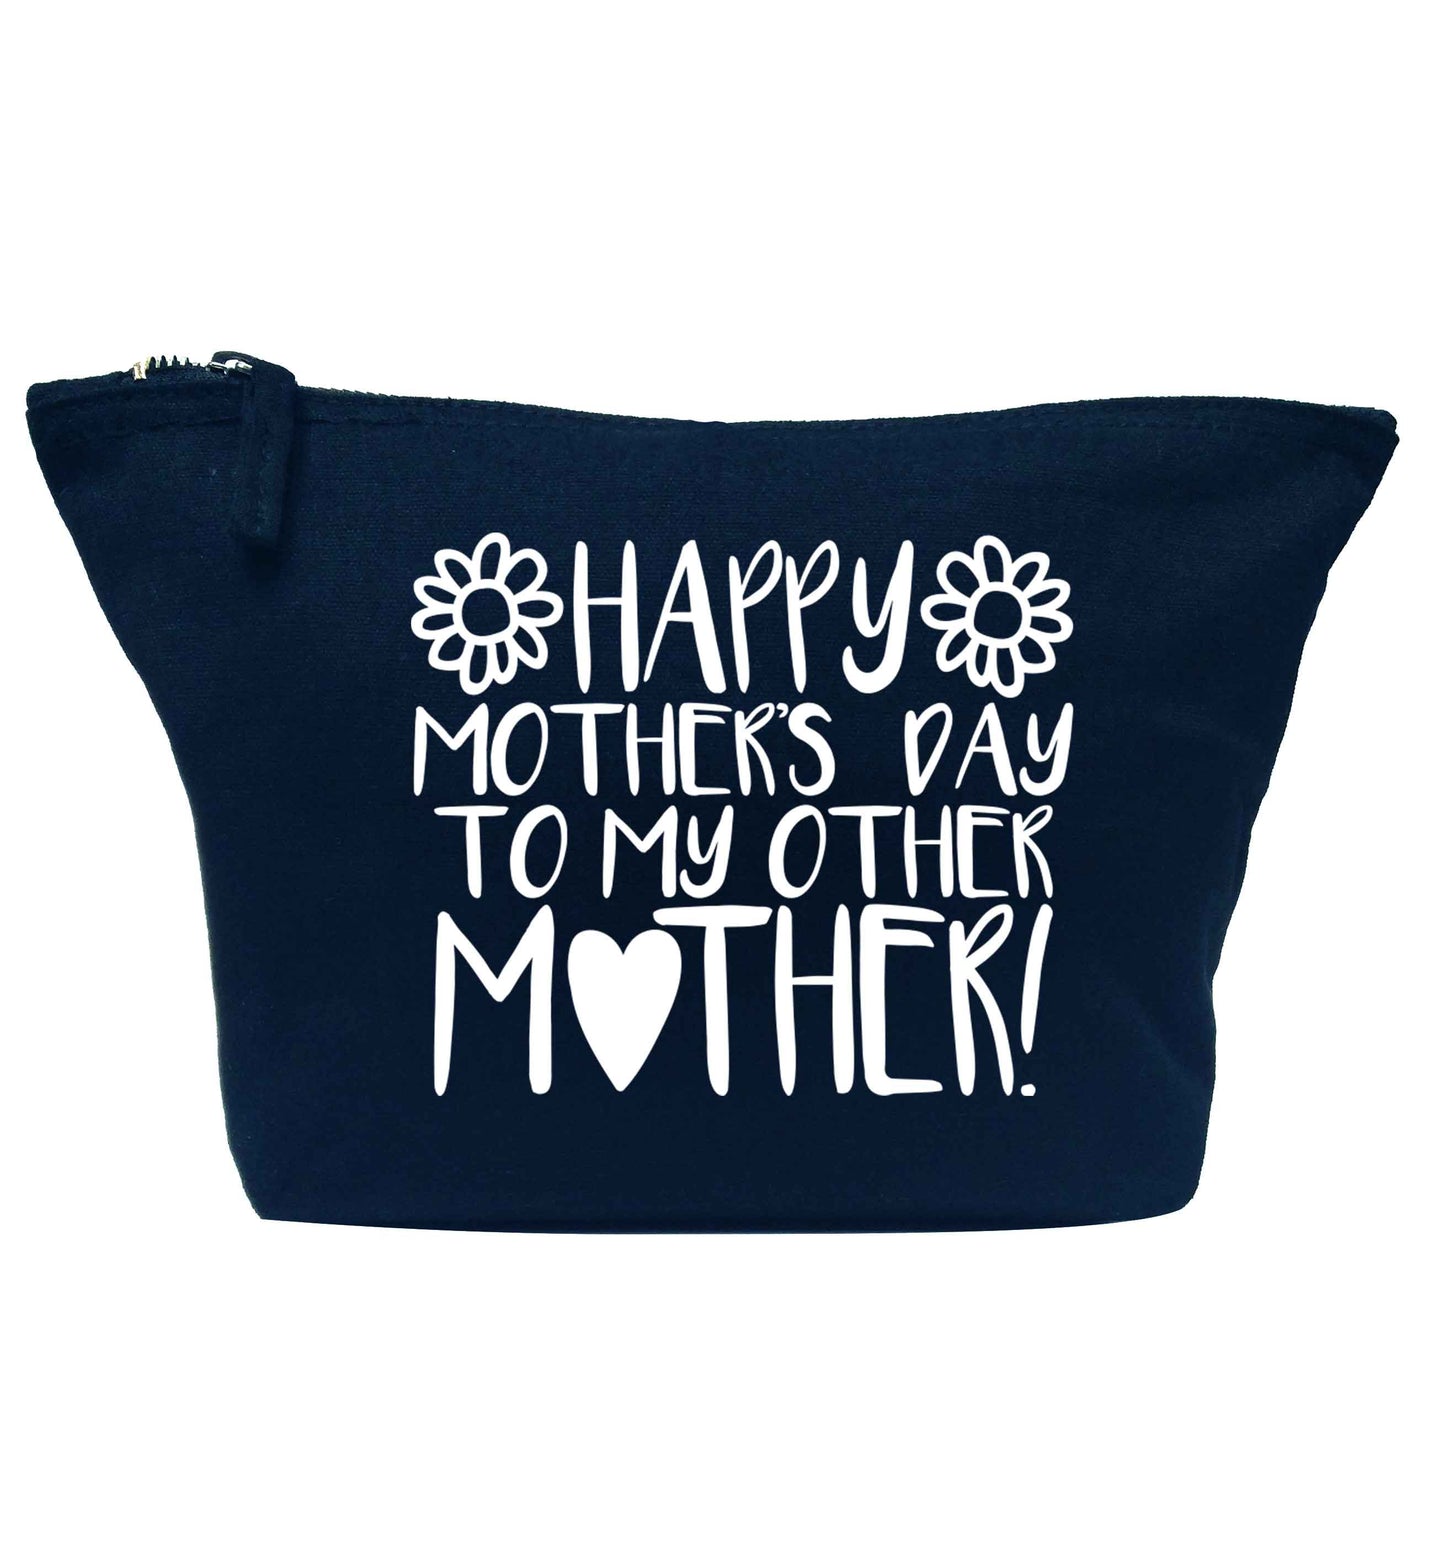 Happy mother's day to my other mother navy makeup bag